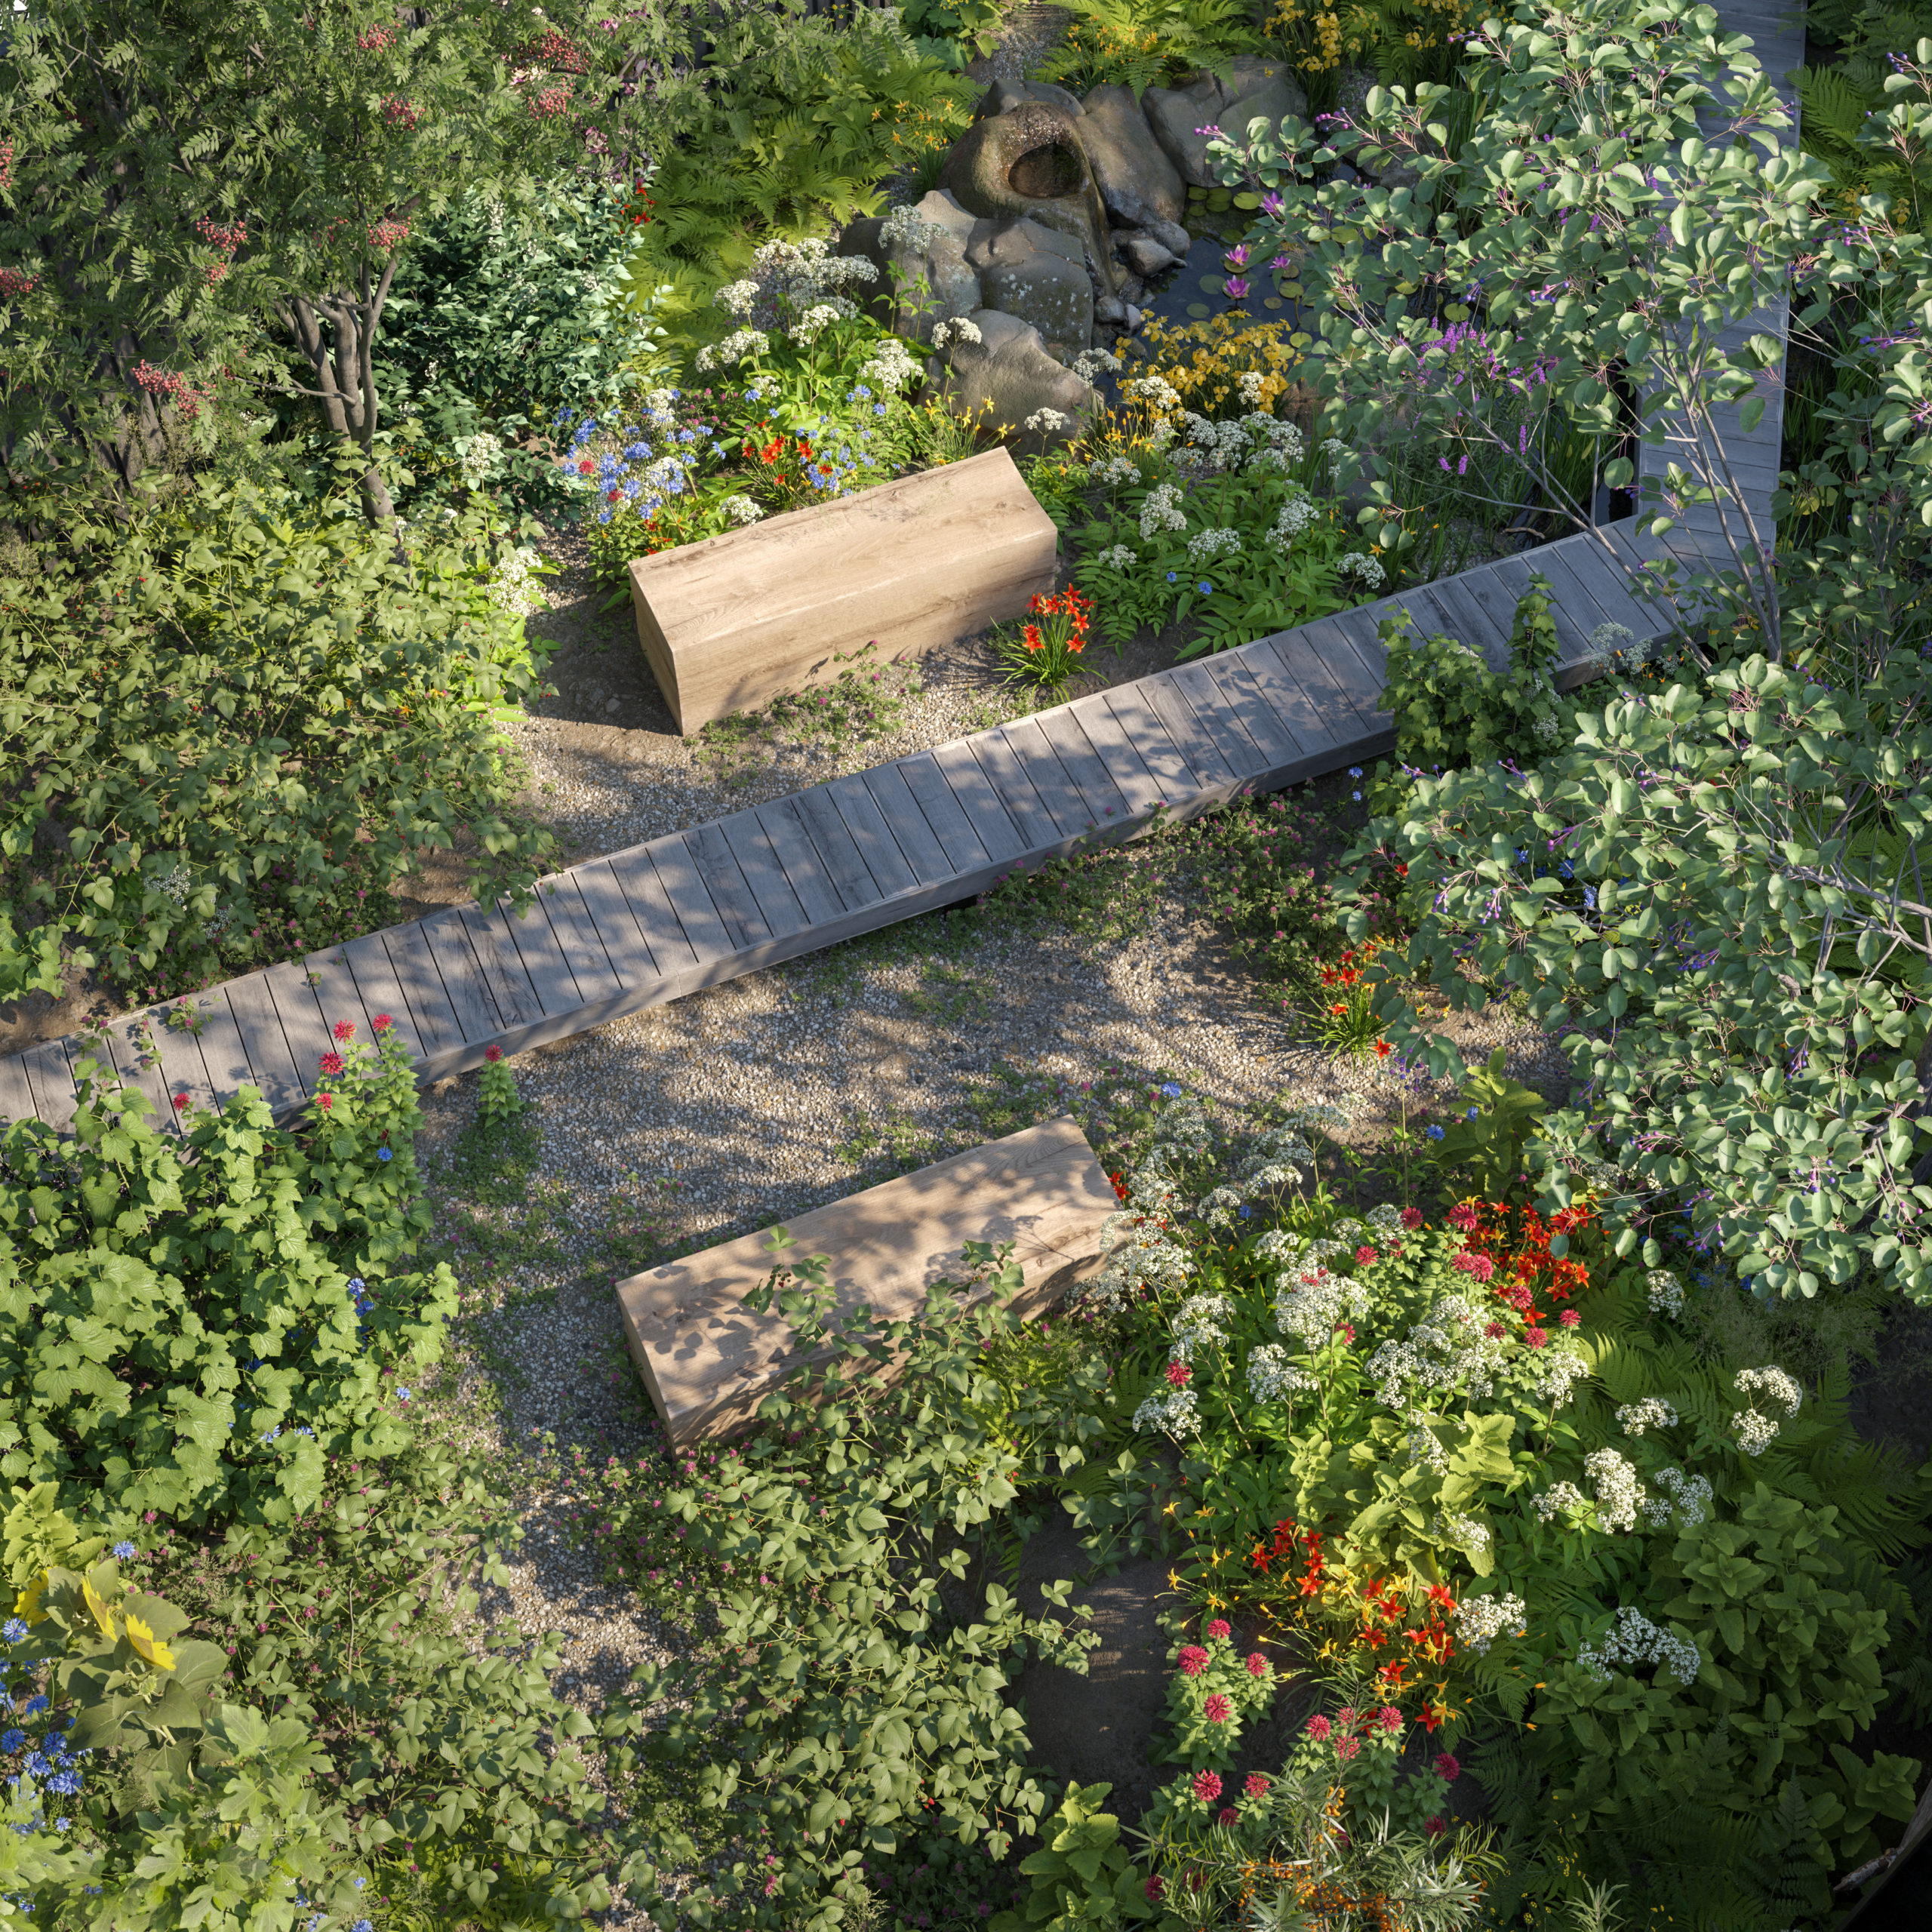 ACO is undertaking a broad-based approach to highlighting the need for a more sustainable approach to water management, including raising awareness at this year’s RHS Hampton Court Palace Garden Festival.